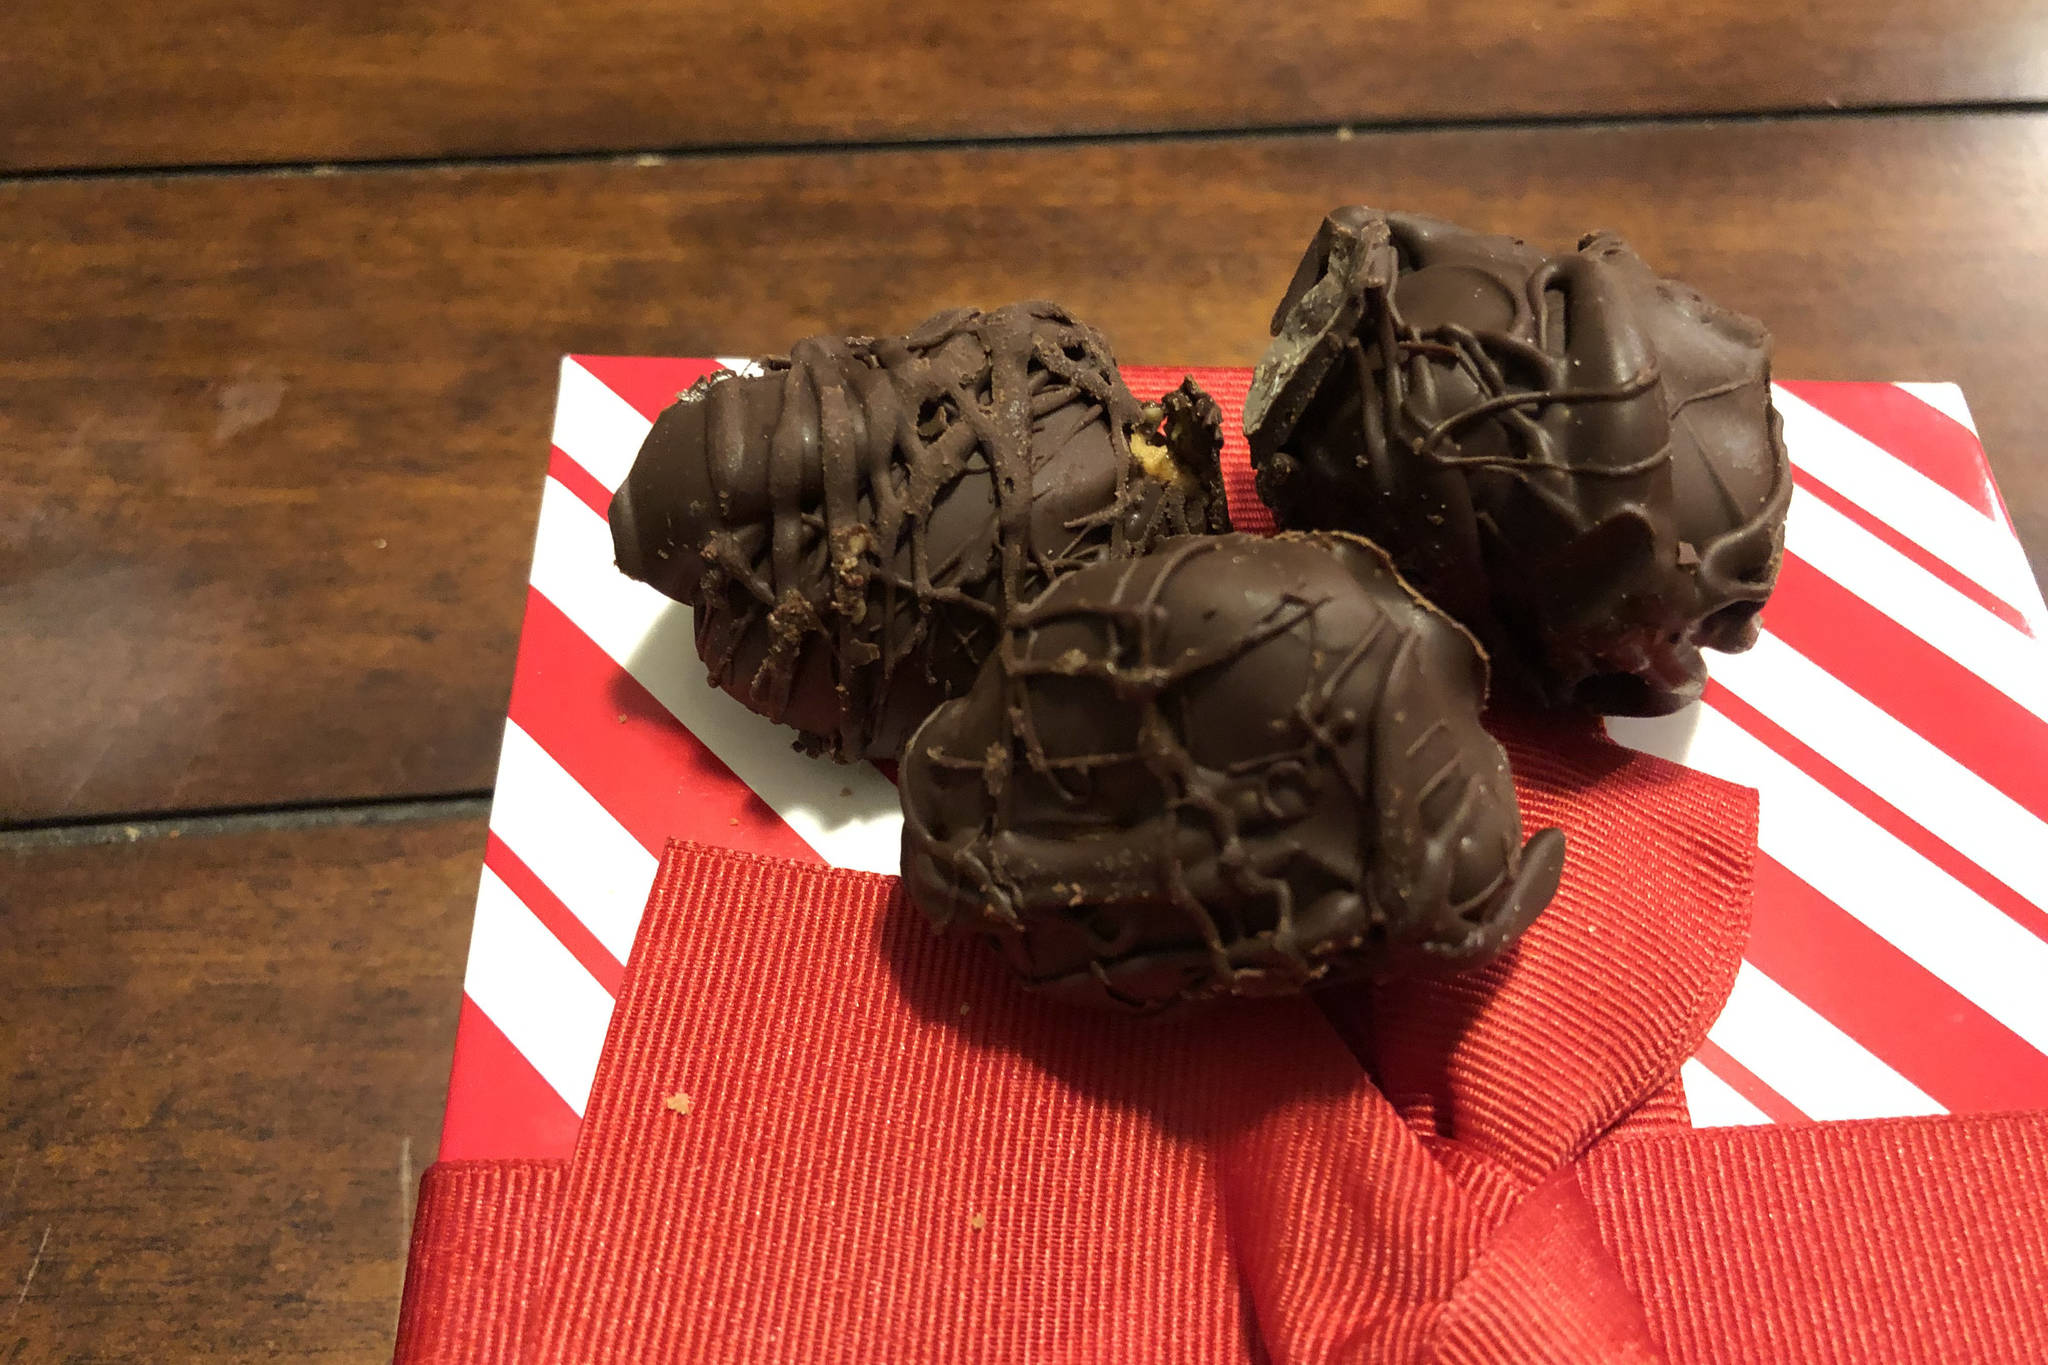 Chocolate and peanut butter balls, also known as Buckeyes, are a great addition to any Christmas cookie box, photographed on Dec. 21, 2020, in Anchorage, Alaska. (Photo by Victoria Petersen/Peninsula Clarion)